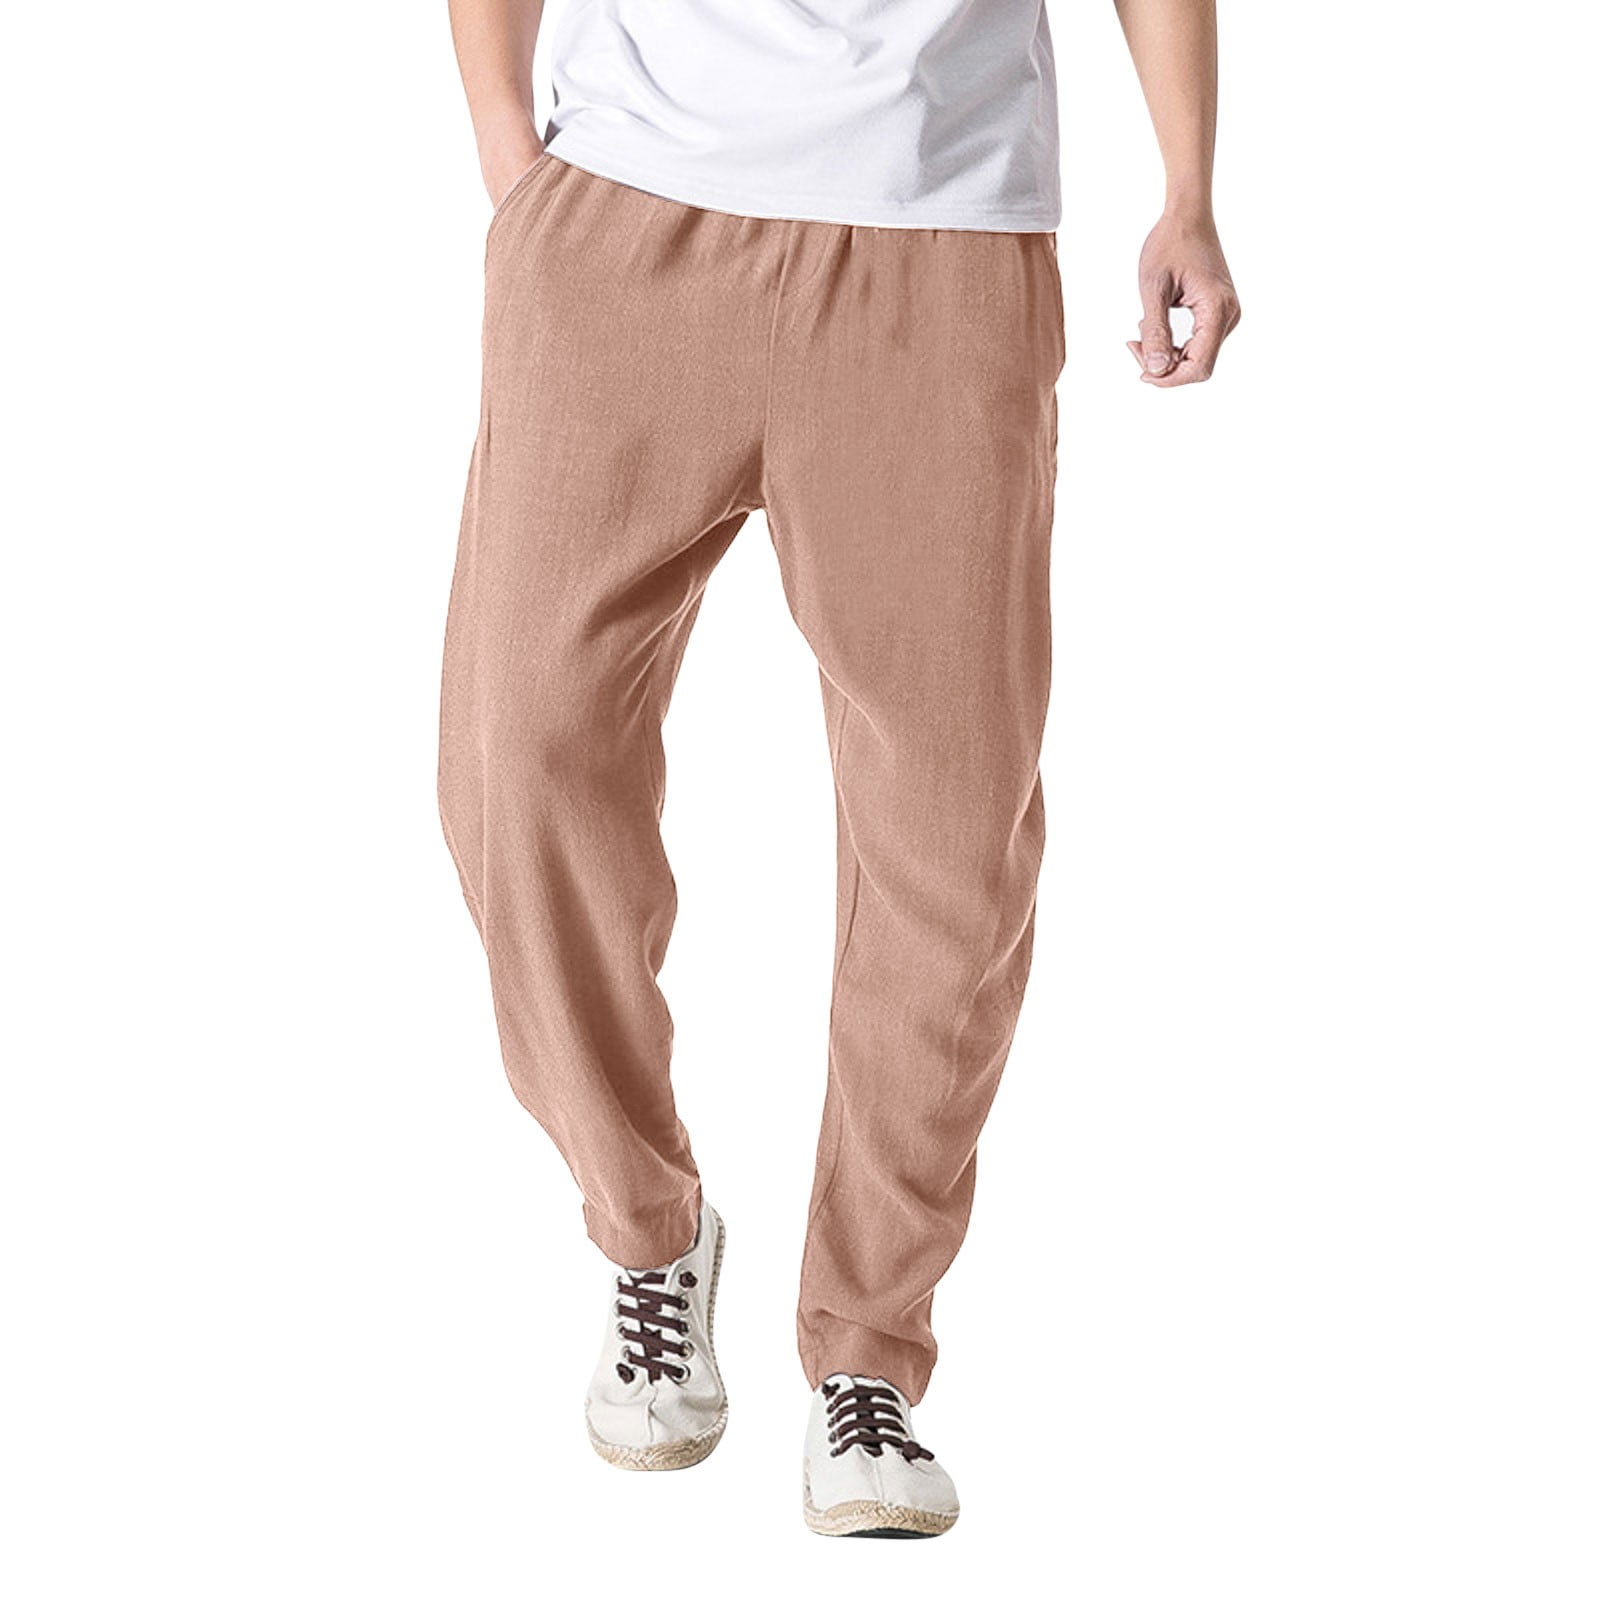 PMUYBHF Mens Sweatpants with Zipper Fly Spring and Summer New Mens ...